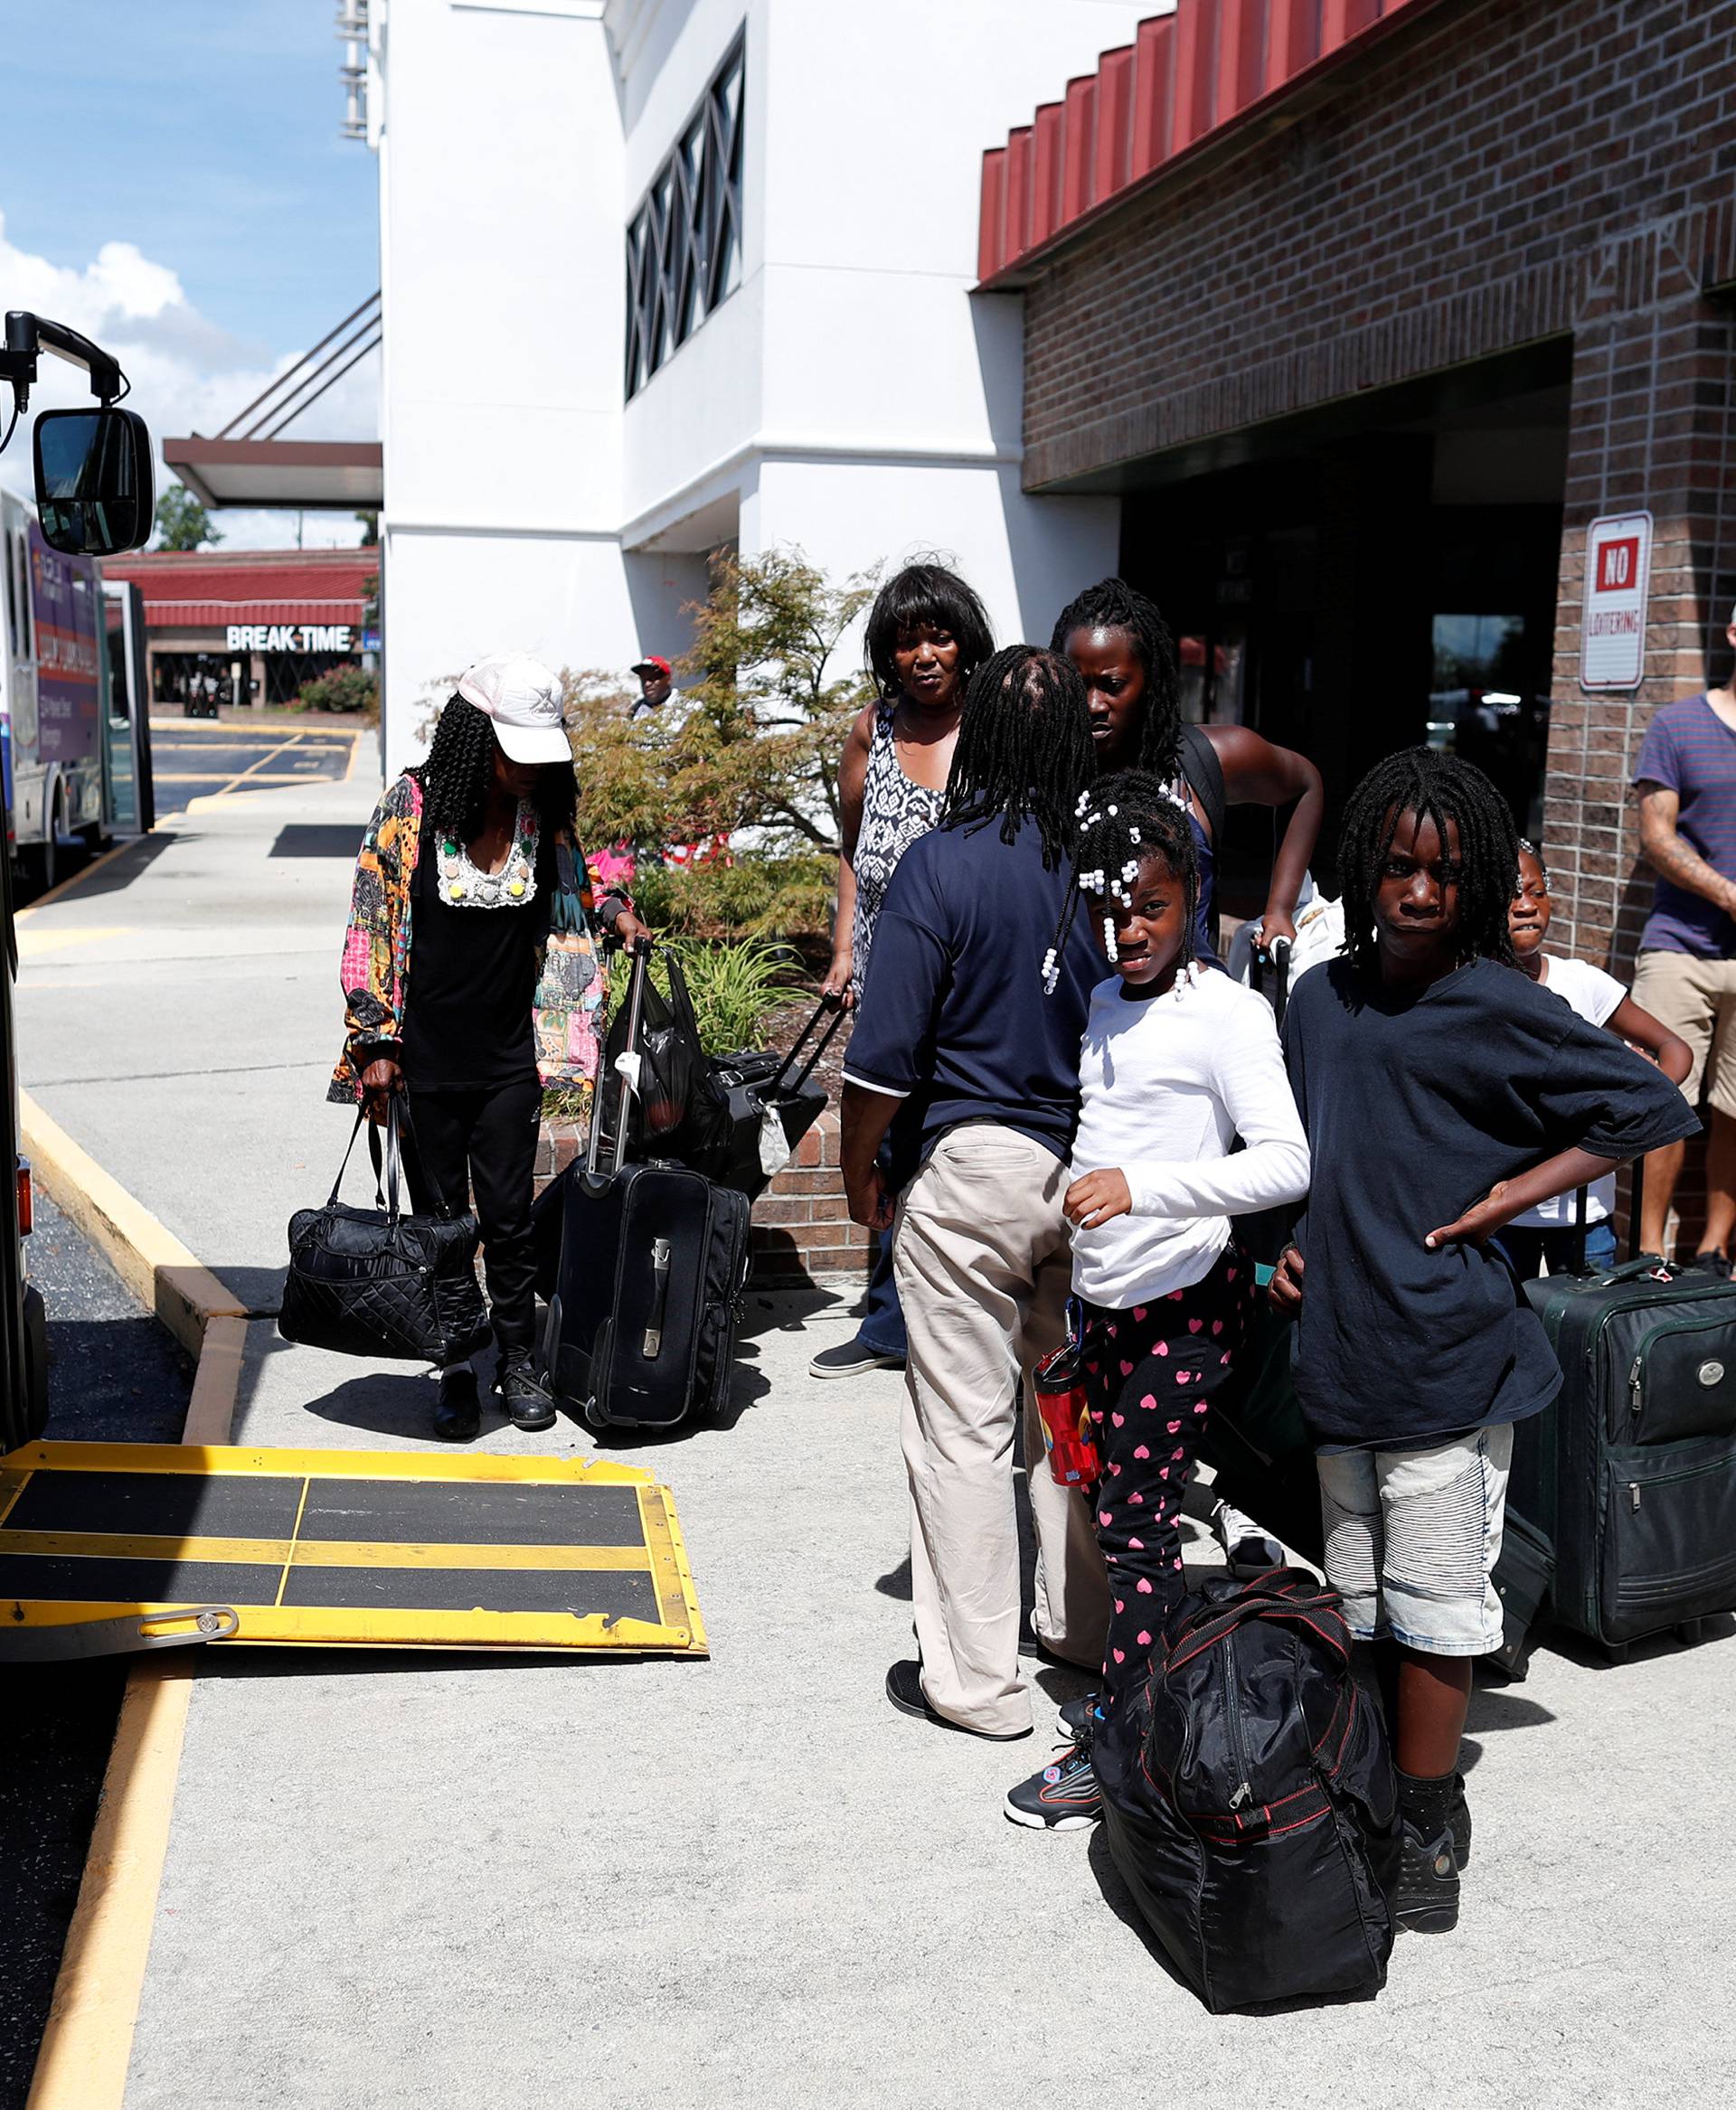 People wait in line for an evacuation bus to Raleigh, North Carolina ahead of the arrival of Hurricane Florence in Wilmington